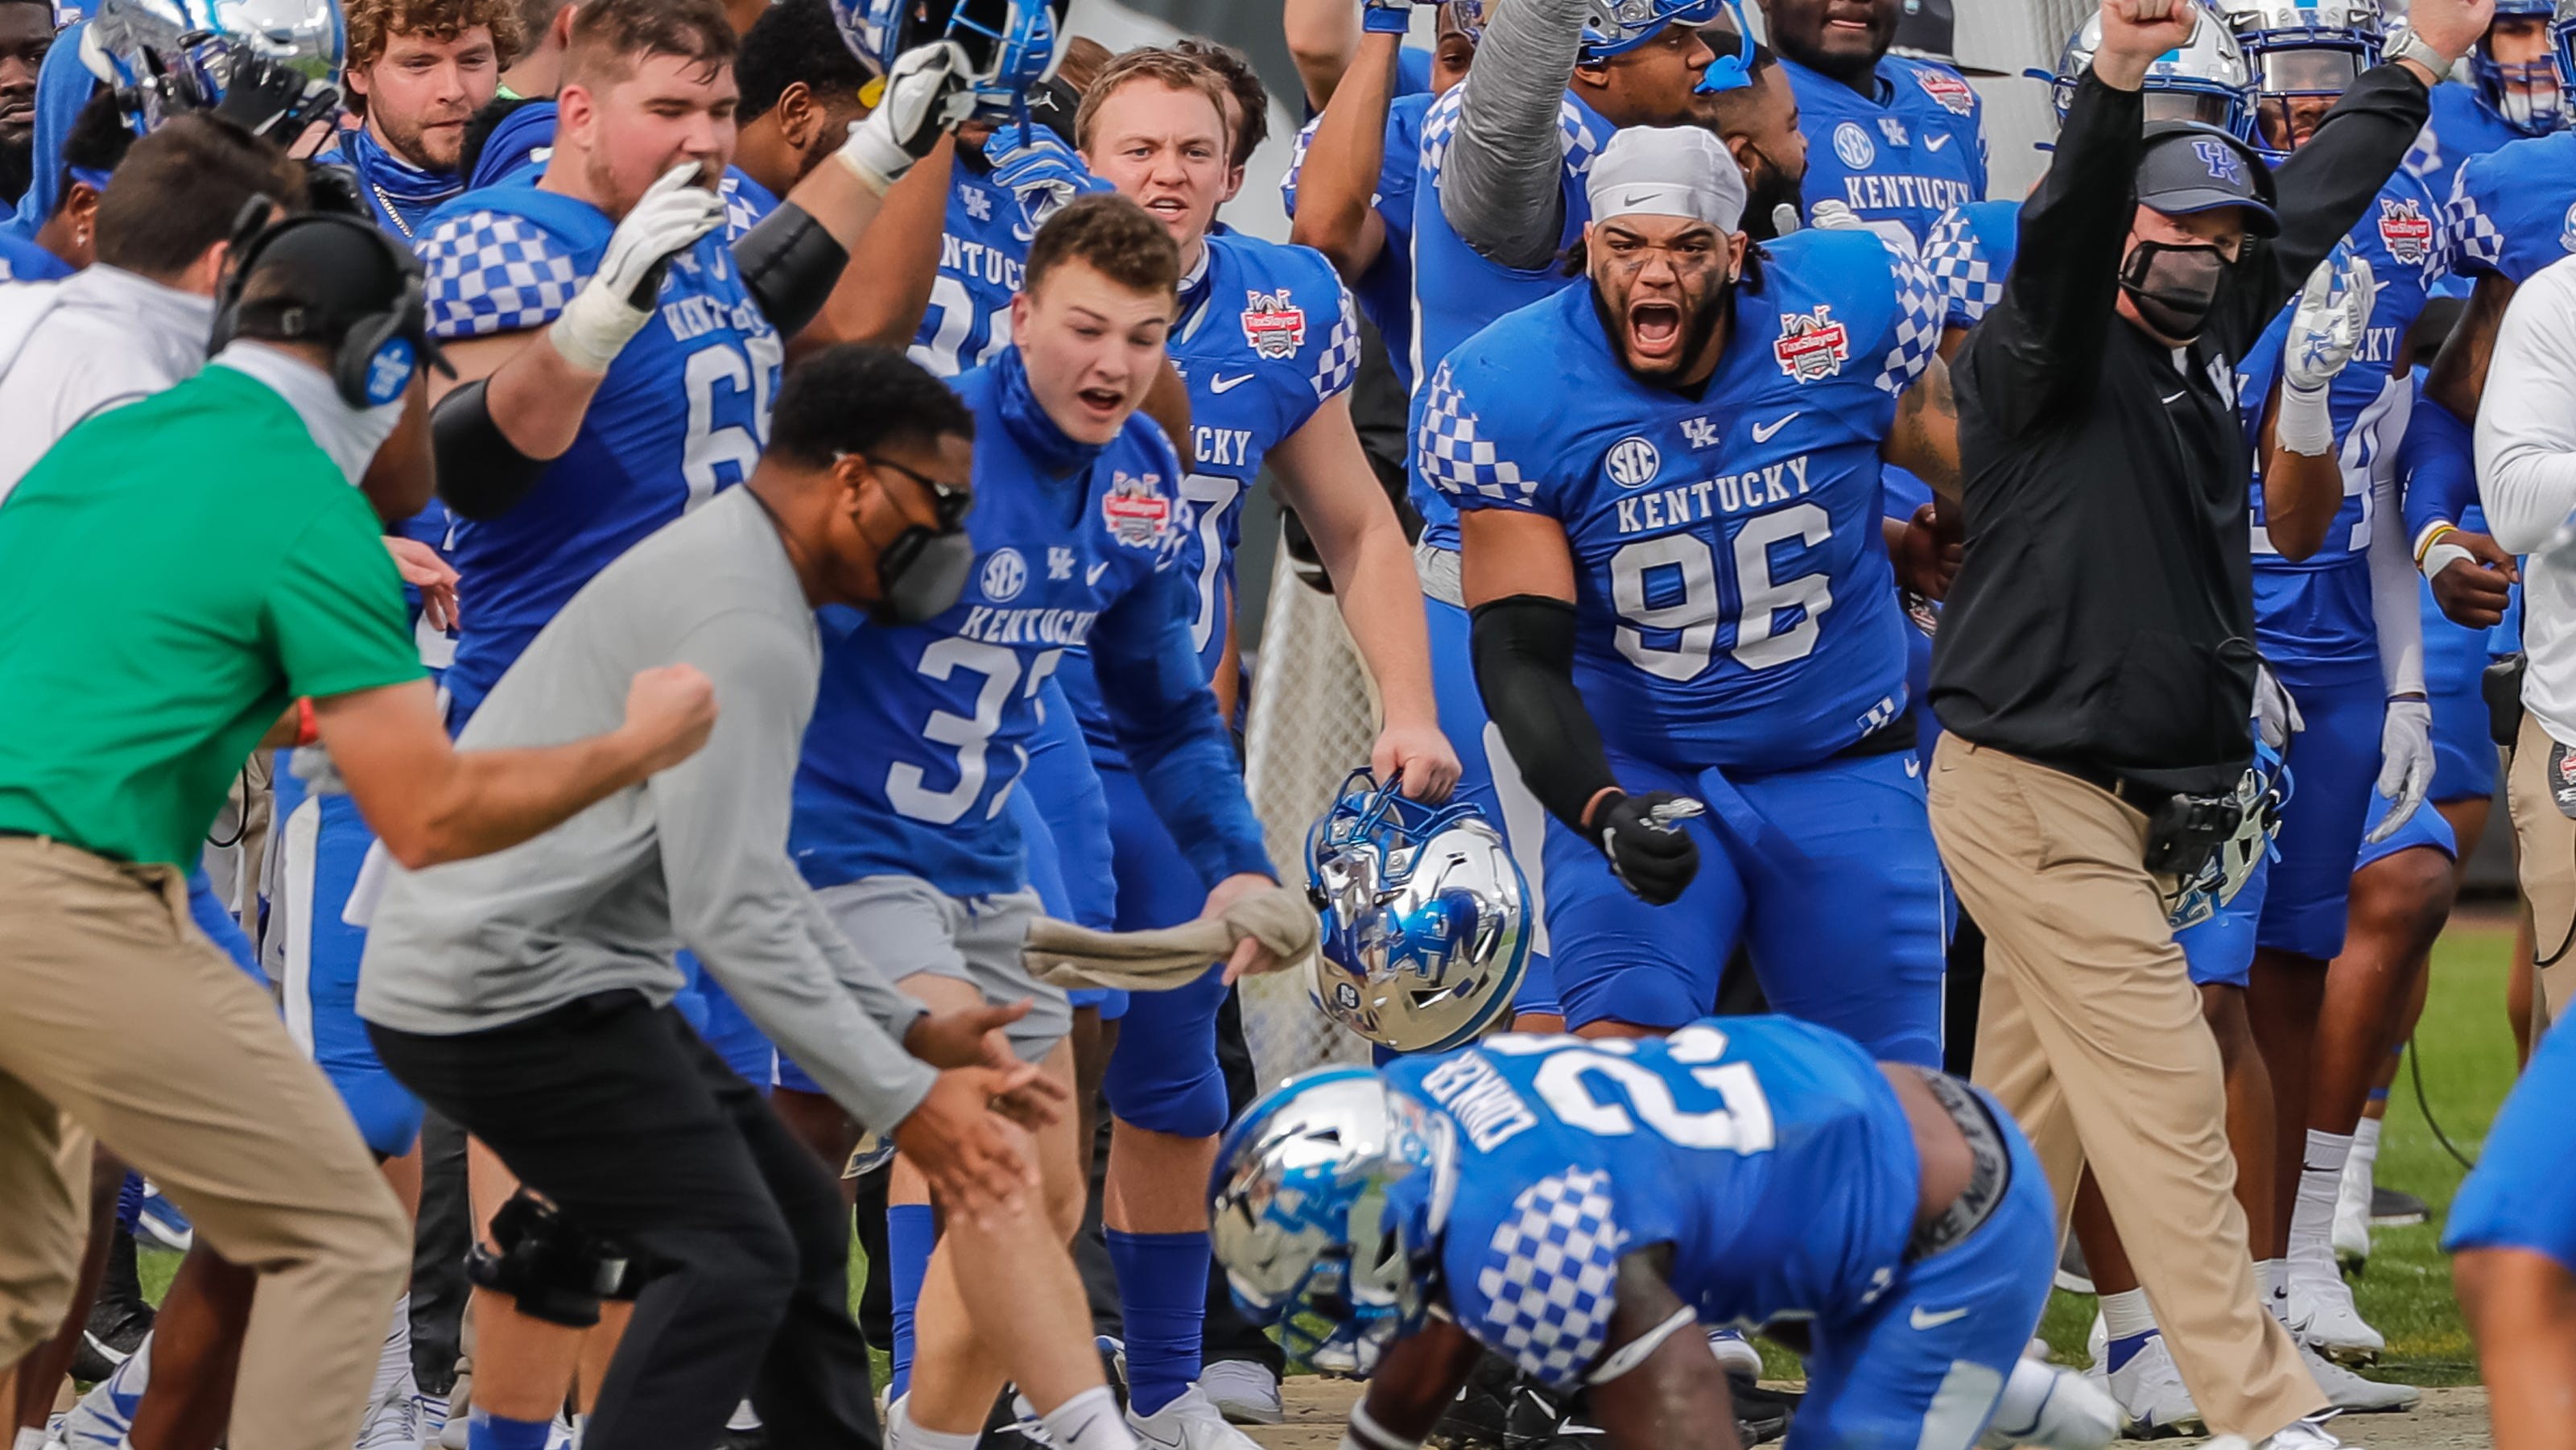 With Gator Bowl win, Kentucky football caps trying season with moment